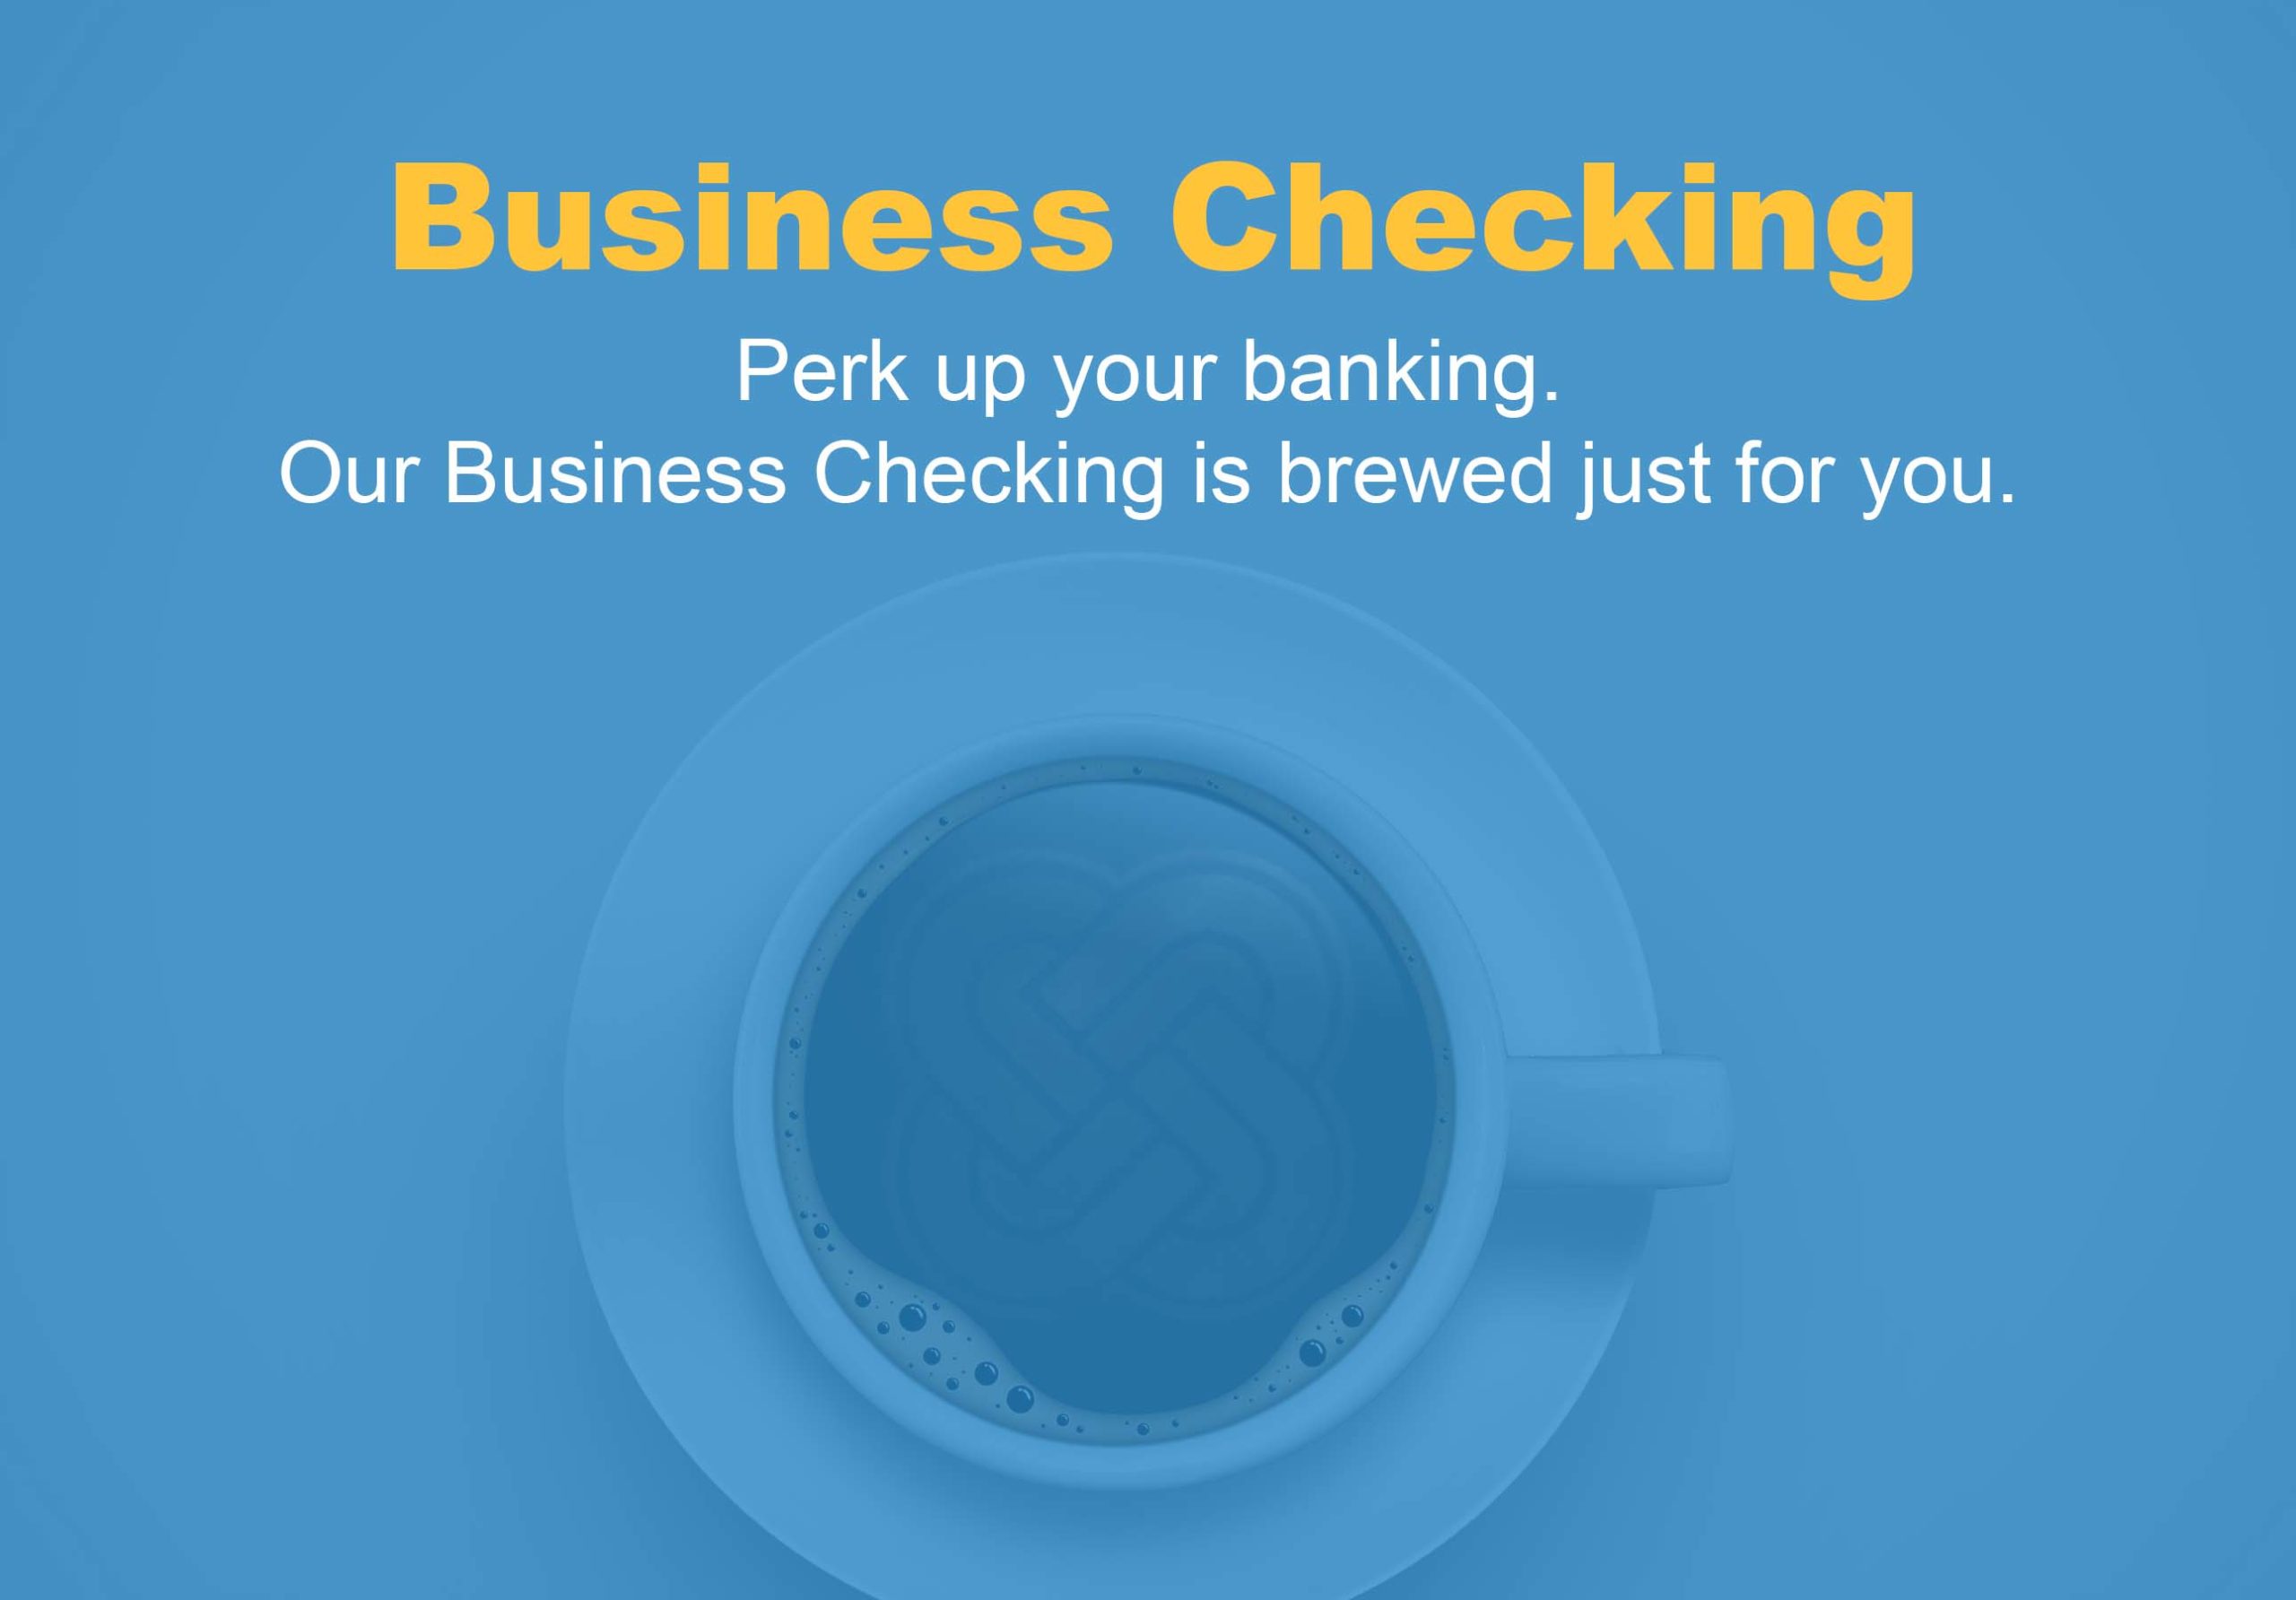 business checking - Perk up your banking. Our Business Checking is brewed just for you.